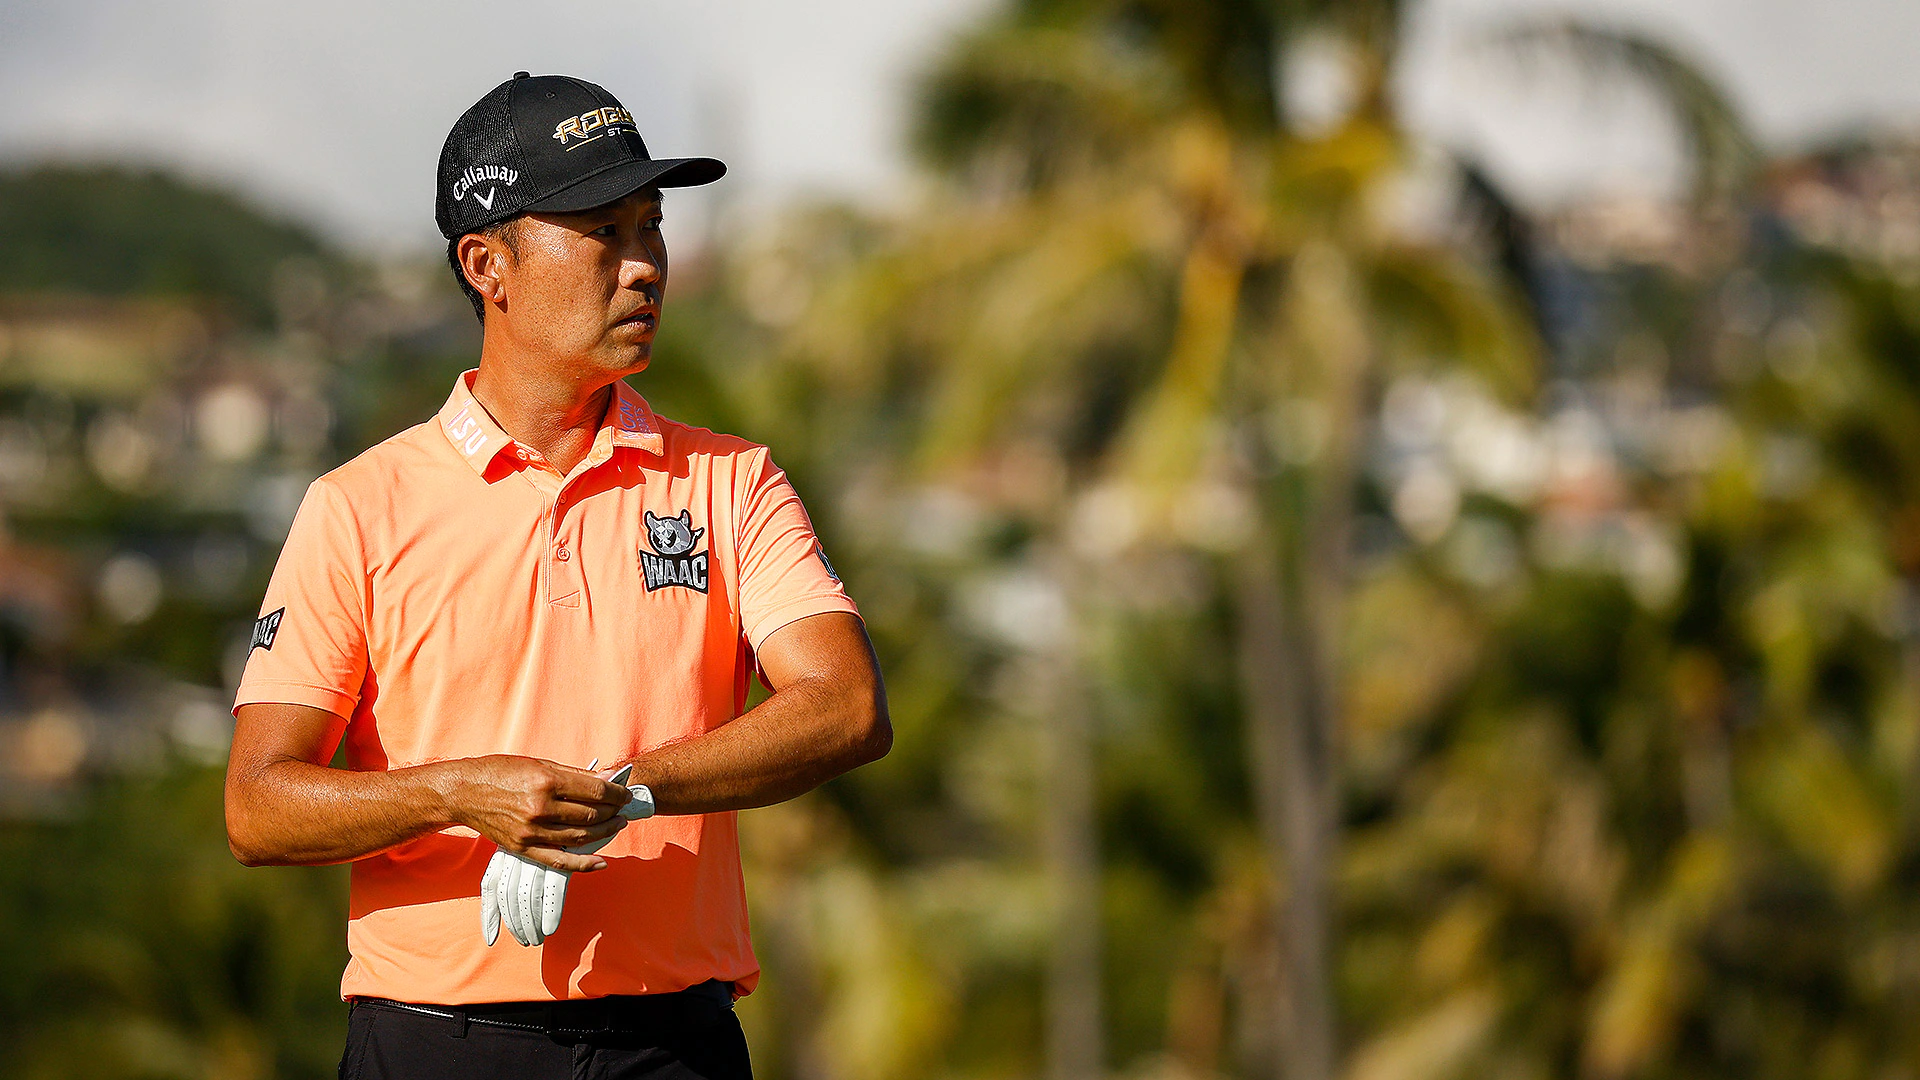 Kevin Na opens title defense in 61 to lead Sony Open, but 'disappointed' in no 59 2